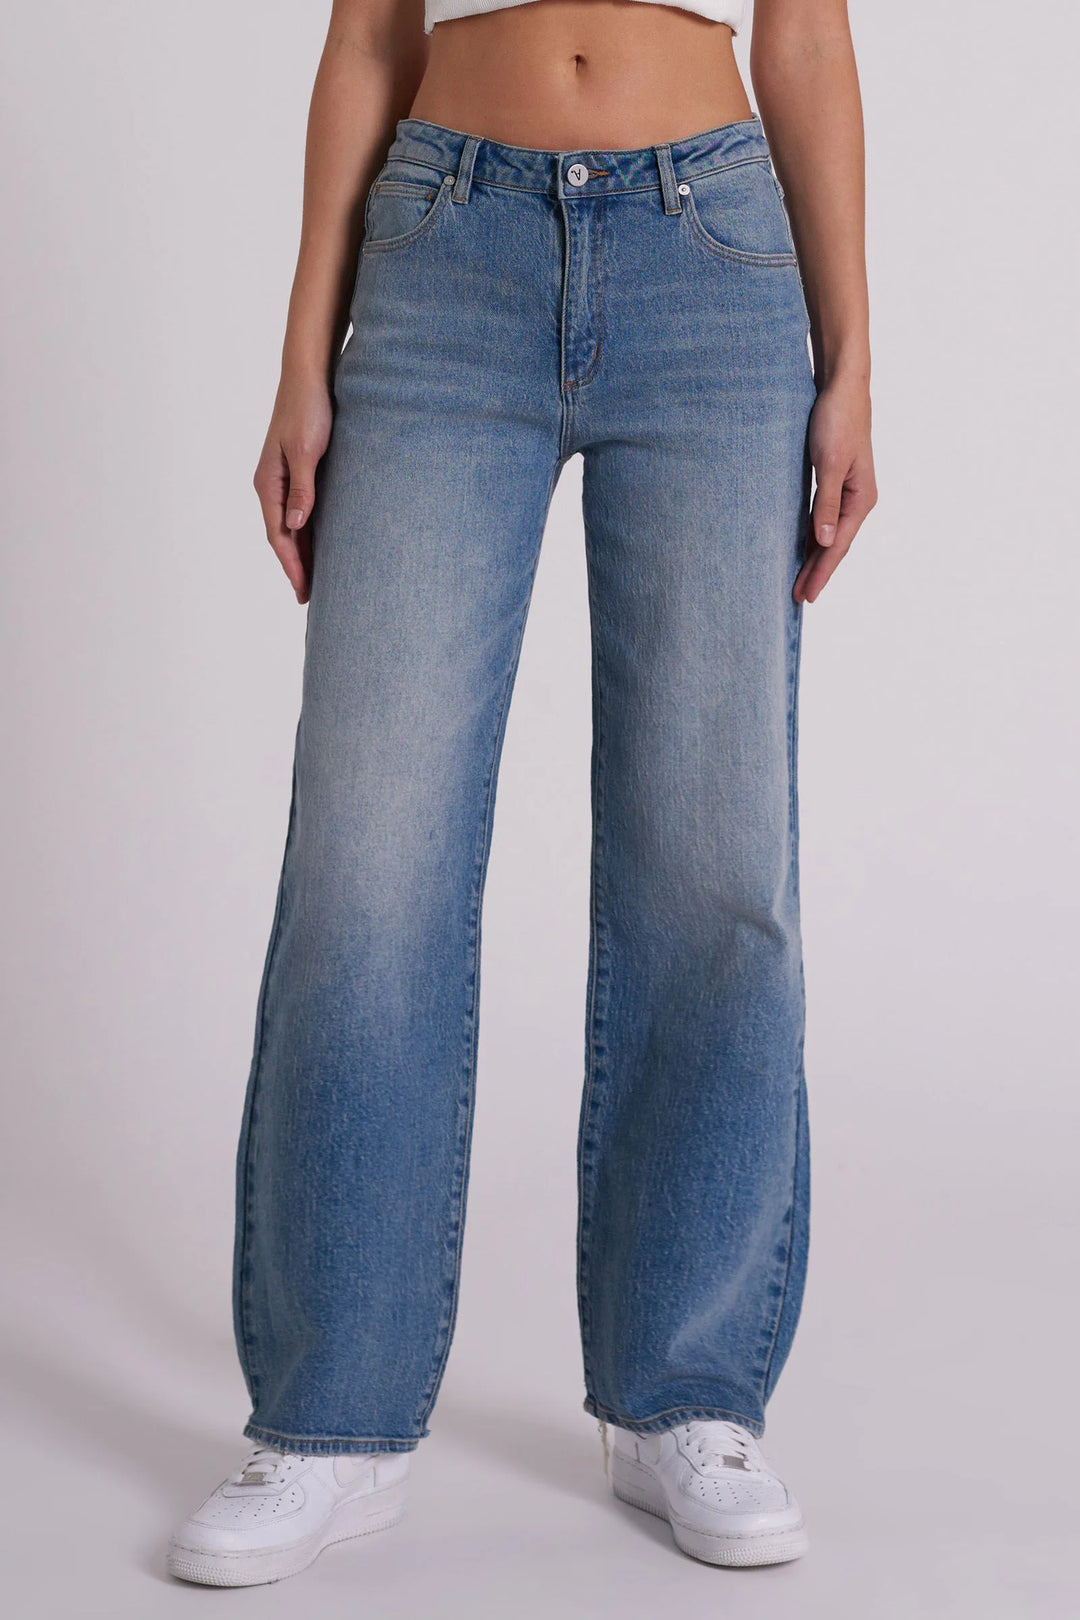 Abrand 95 Mid Baggy Jean - Lula Recycled - Mid Vintage Blue